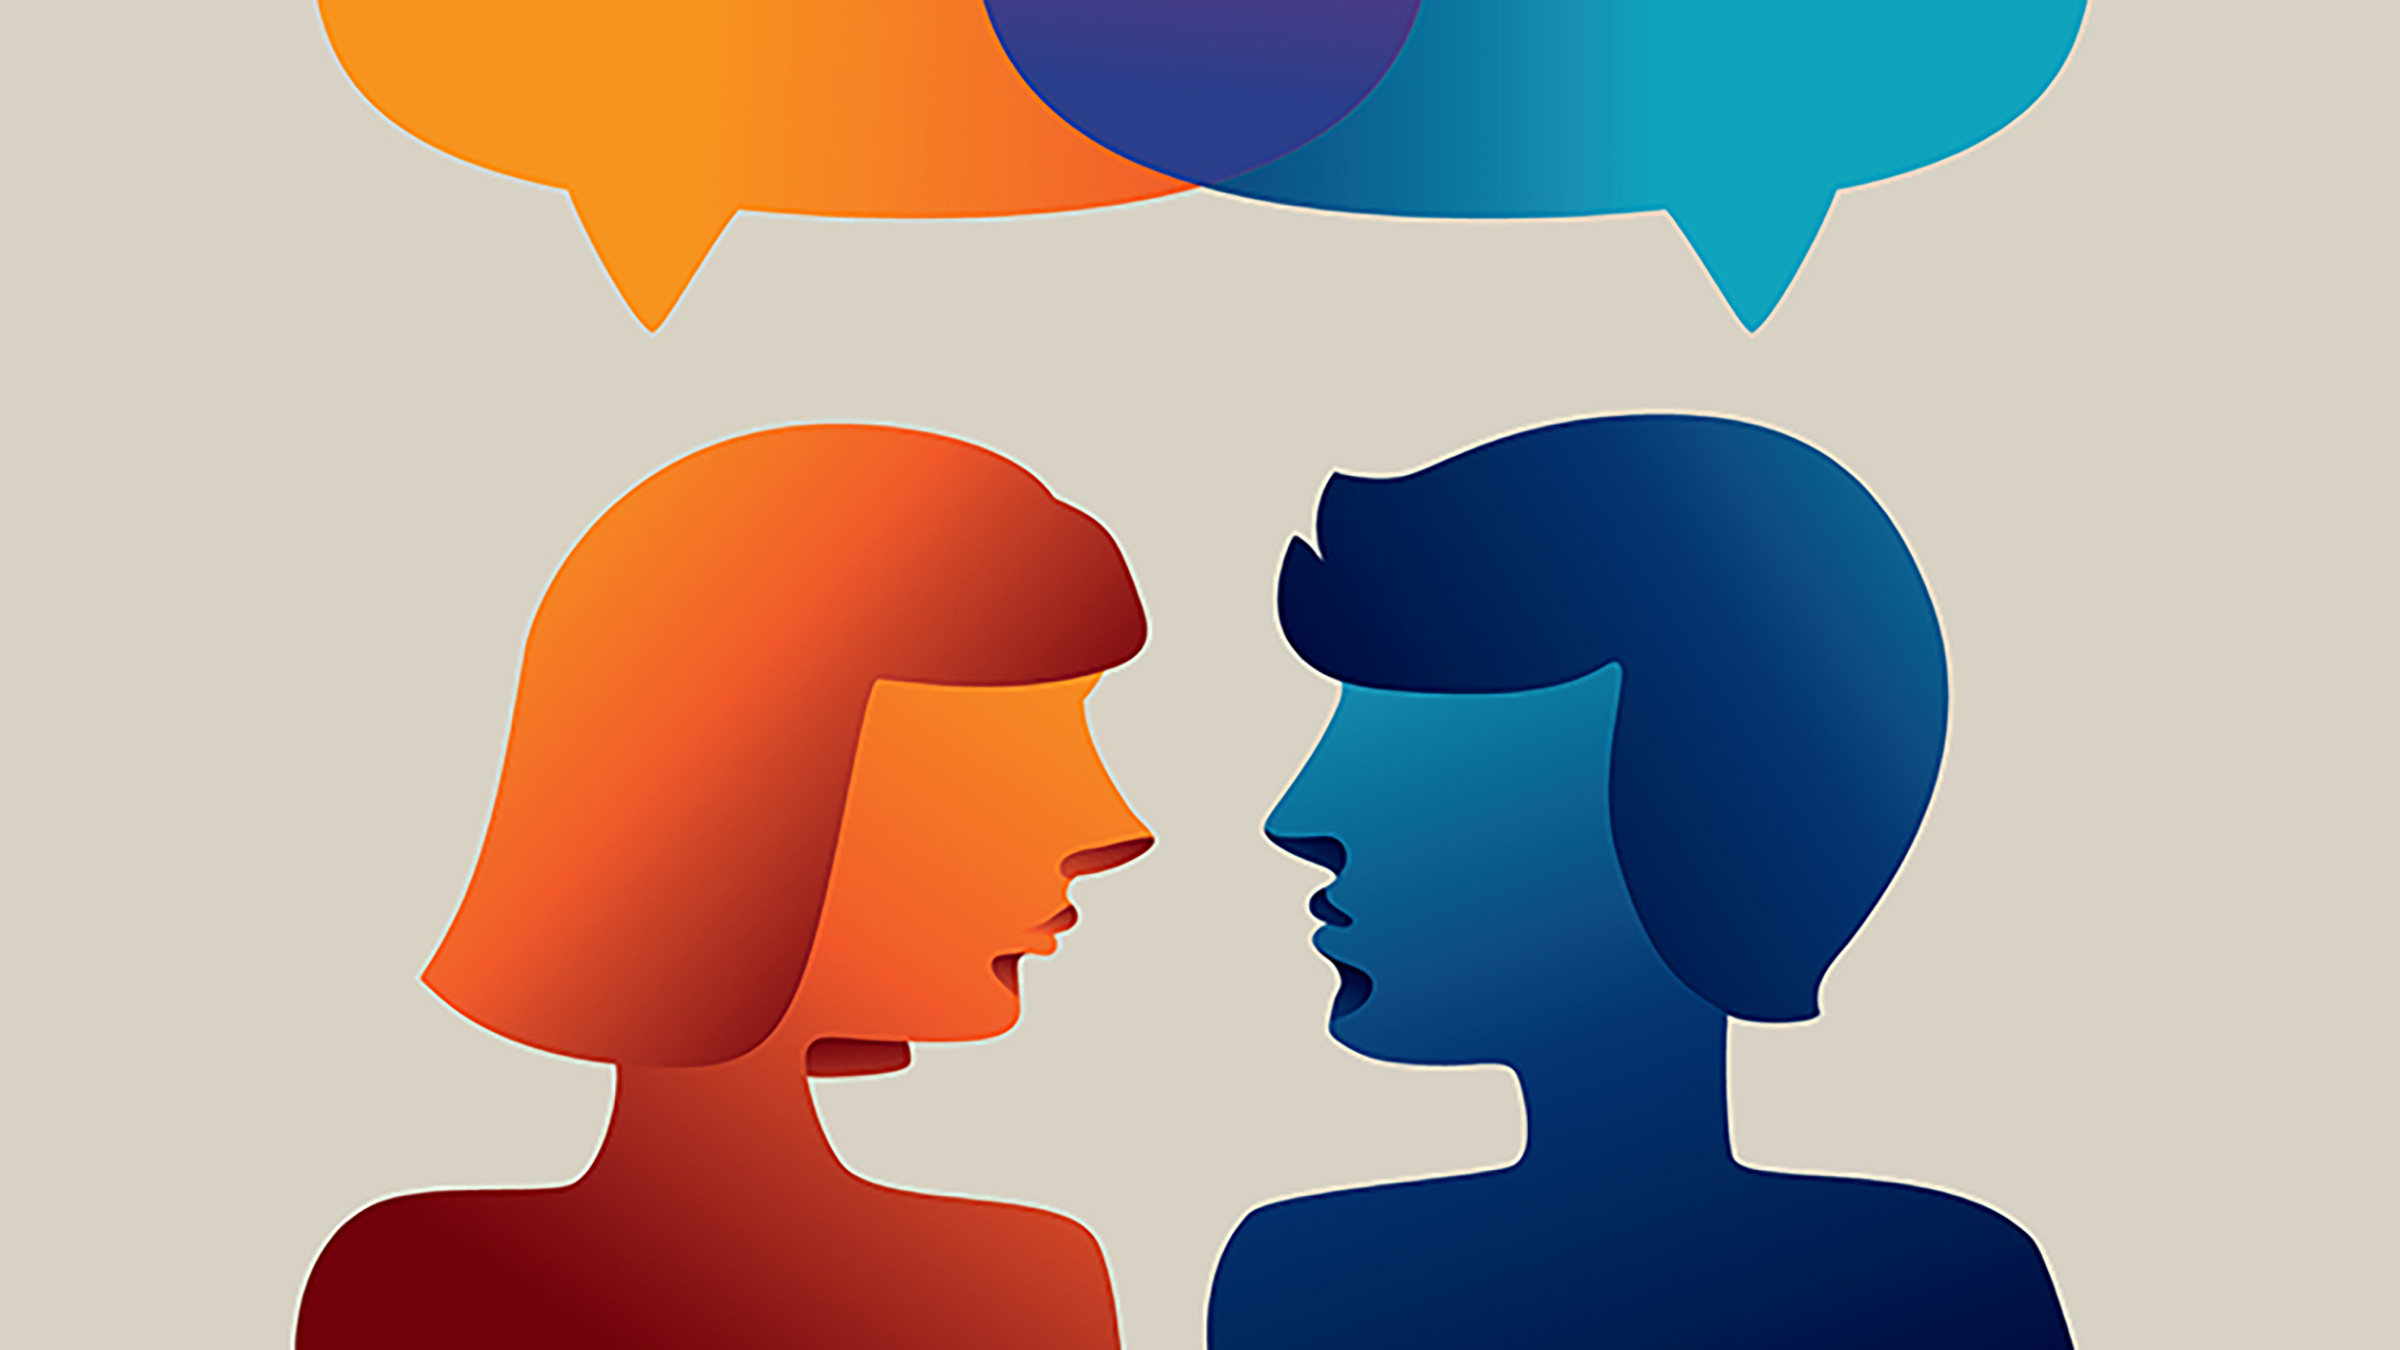 Illustration of two people speaking with word bubbles over their heads